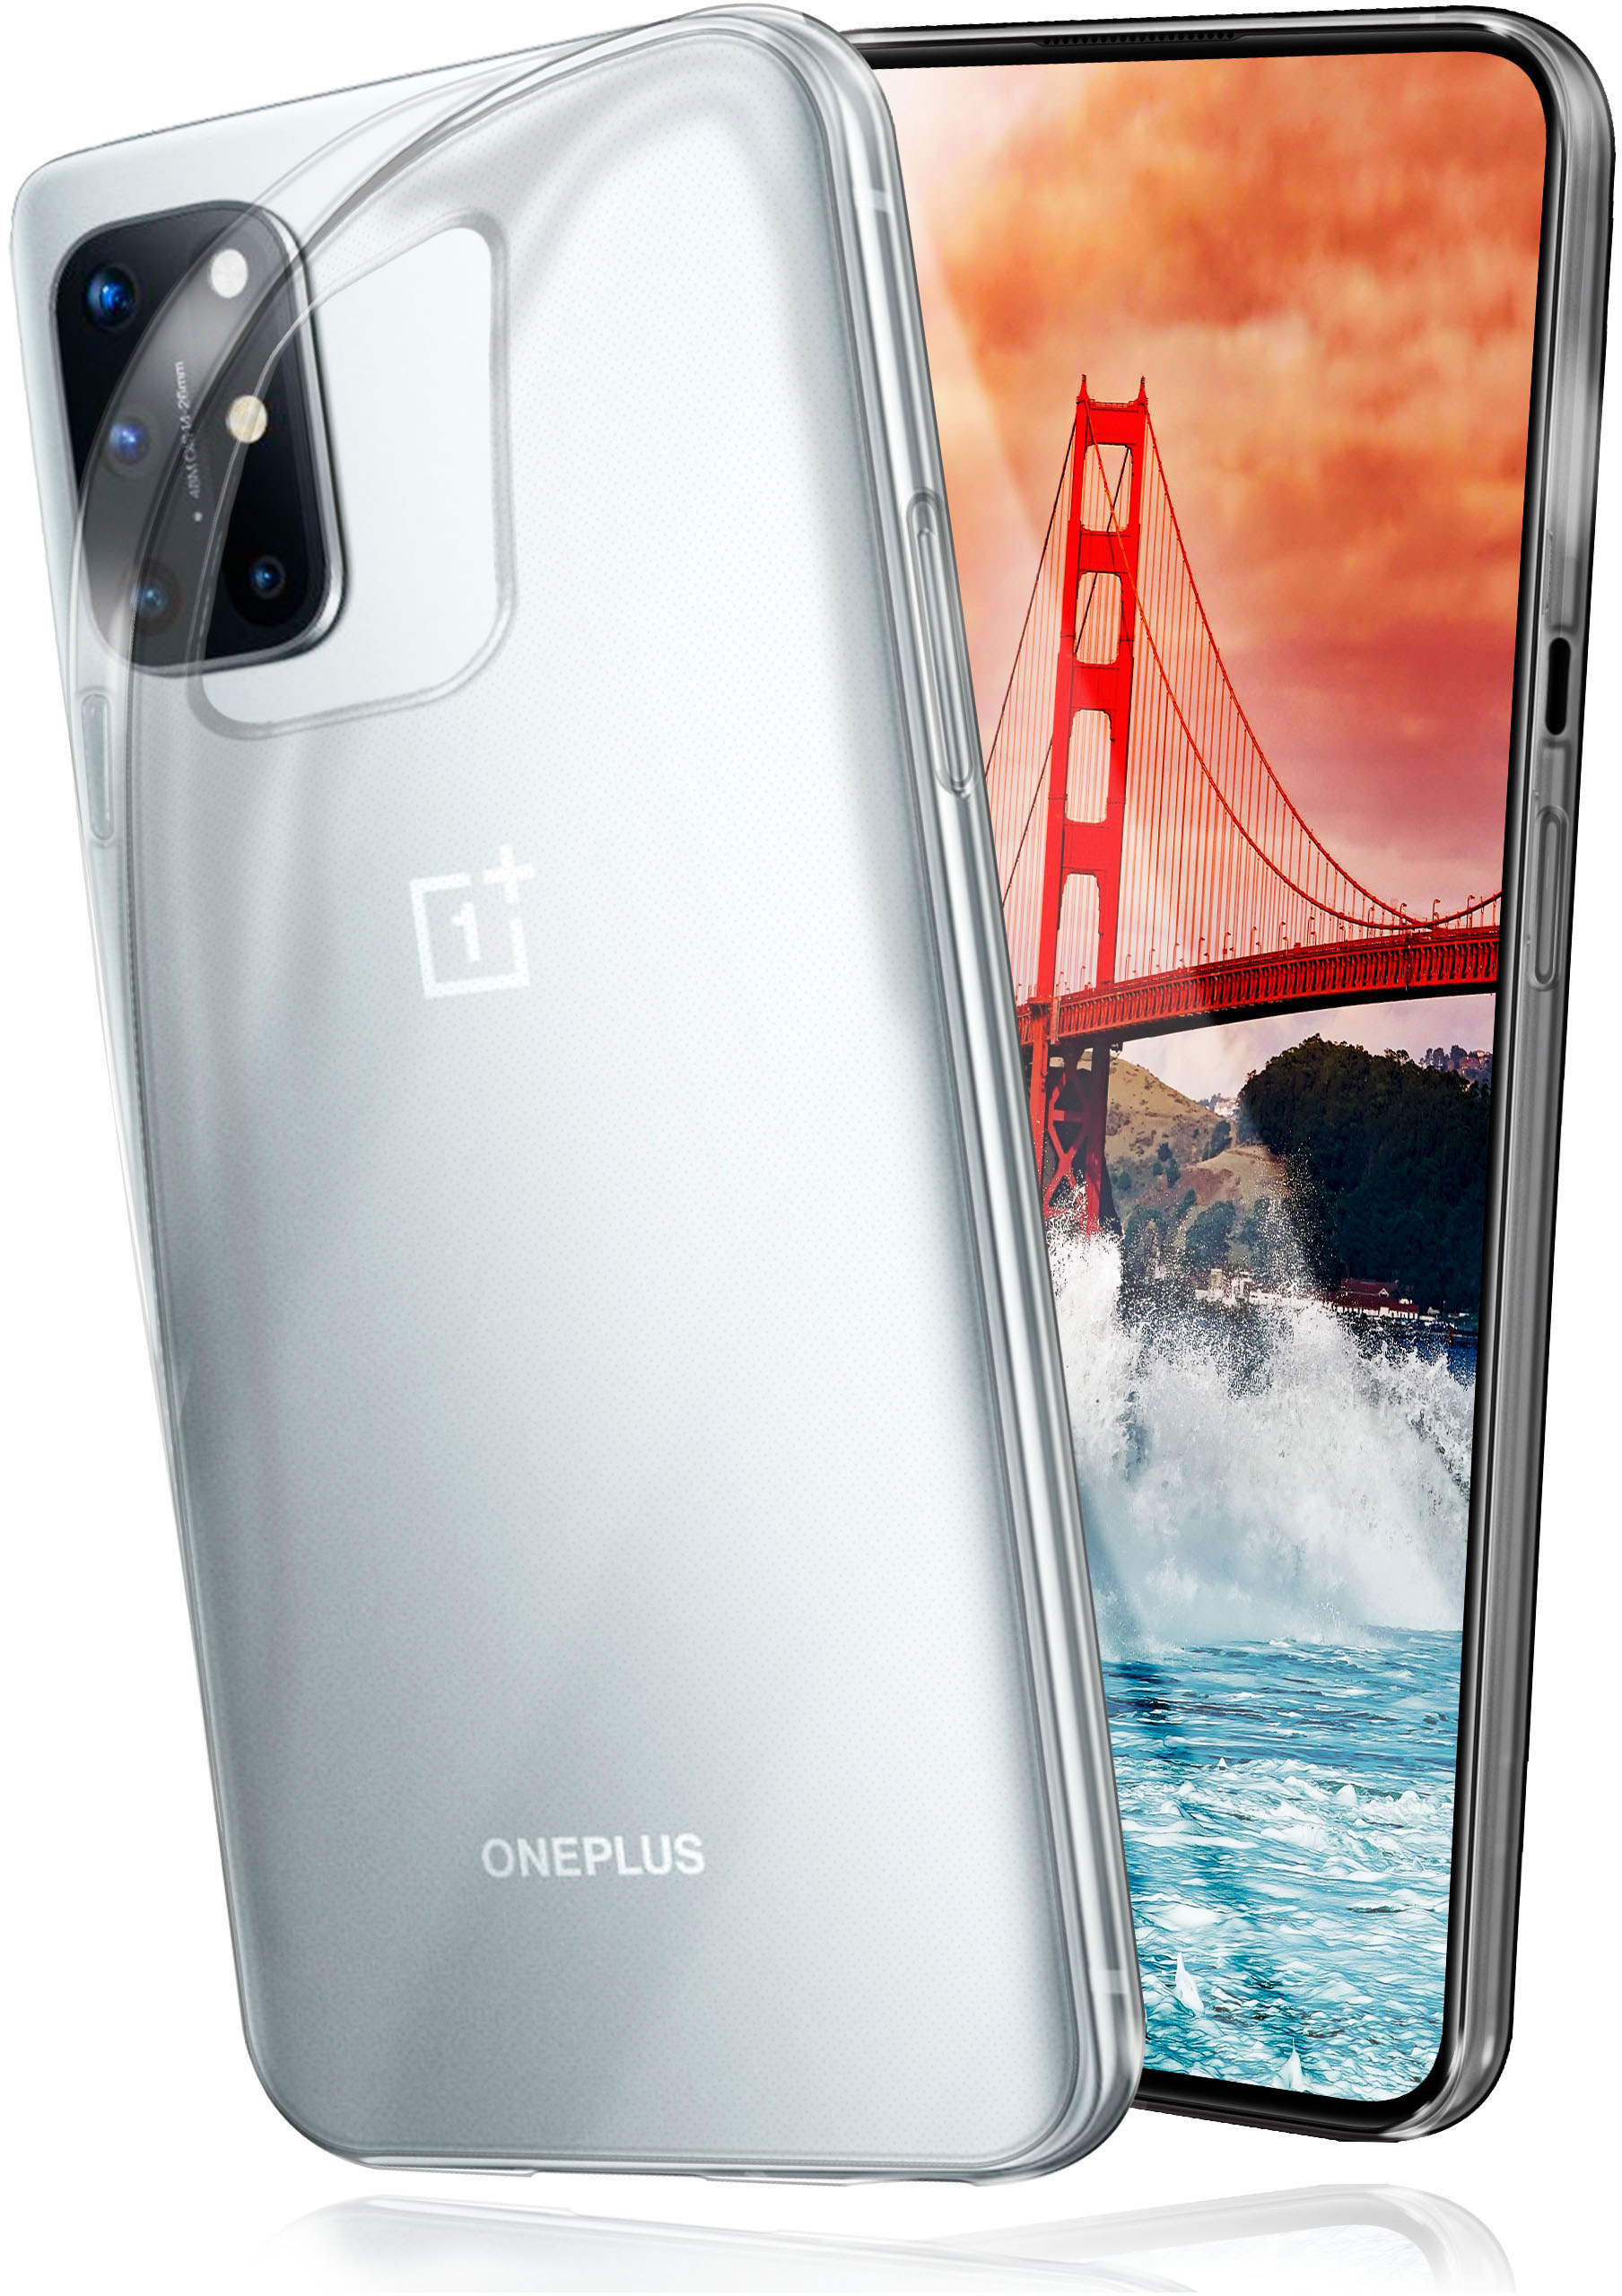 Backcover, MOEX Crystal-Clear Case, Aero 8T, OnePlus,